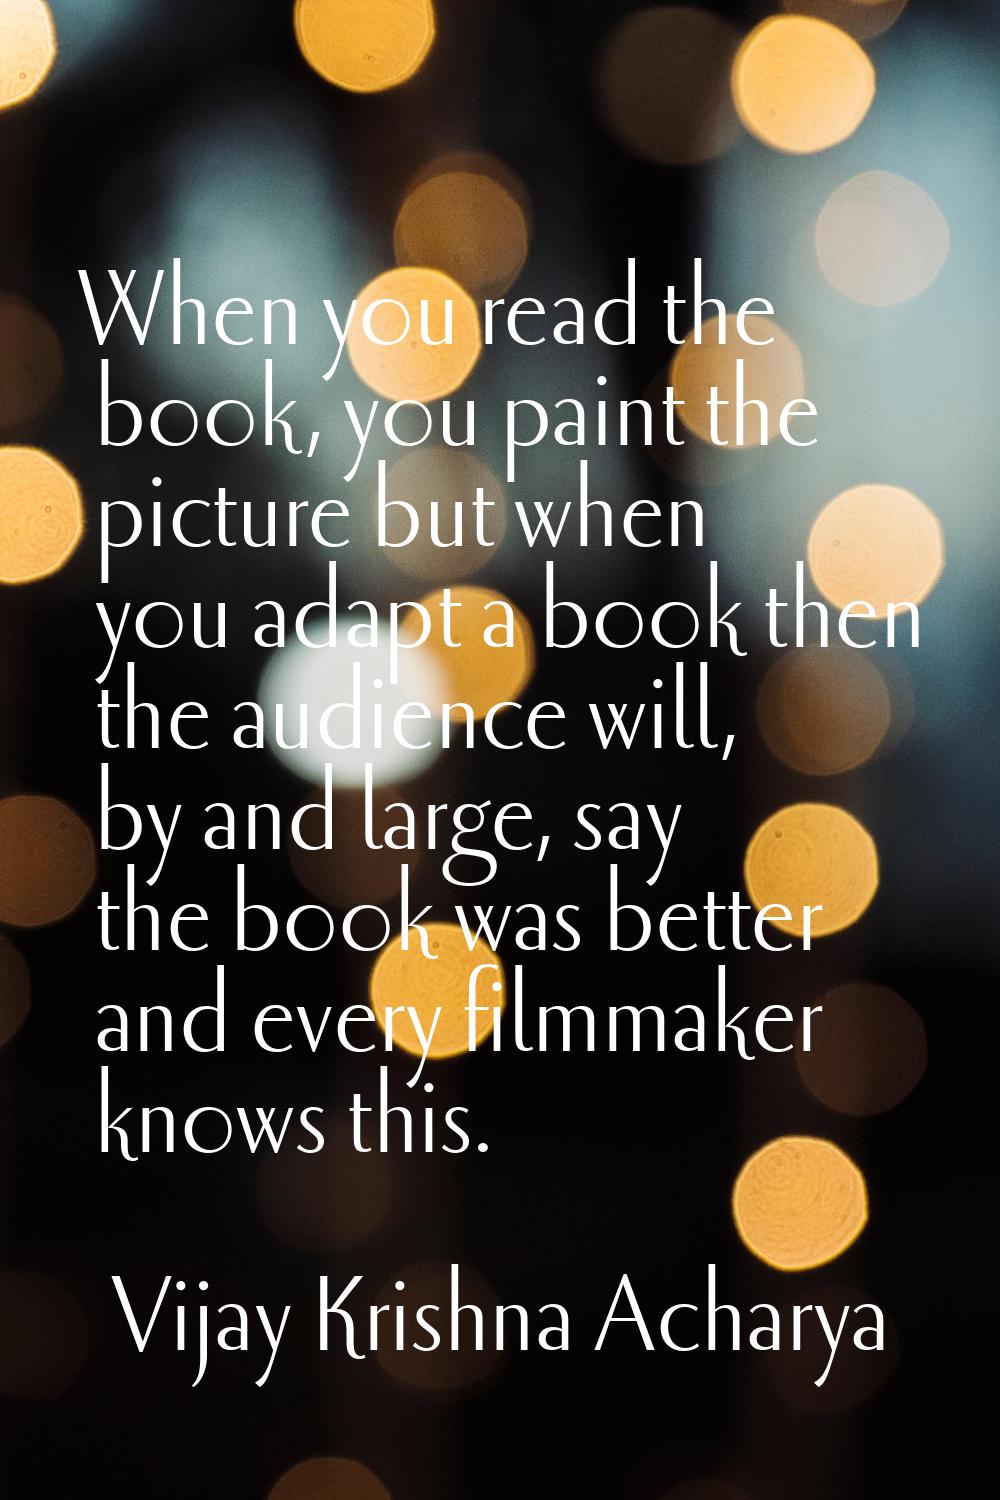 When you read the book, you paint the picture but when you adapt a book then the audience will, by 